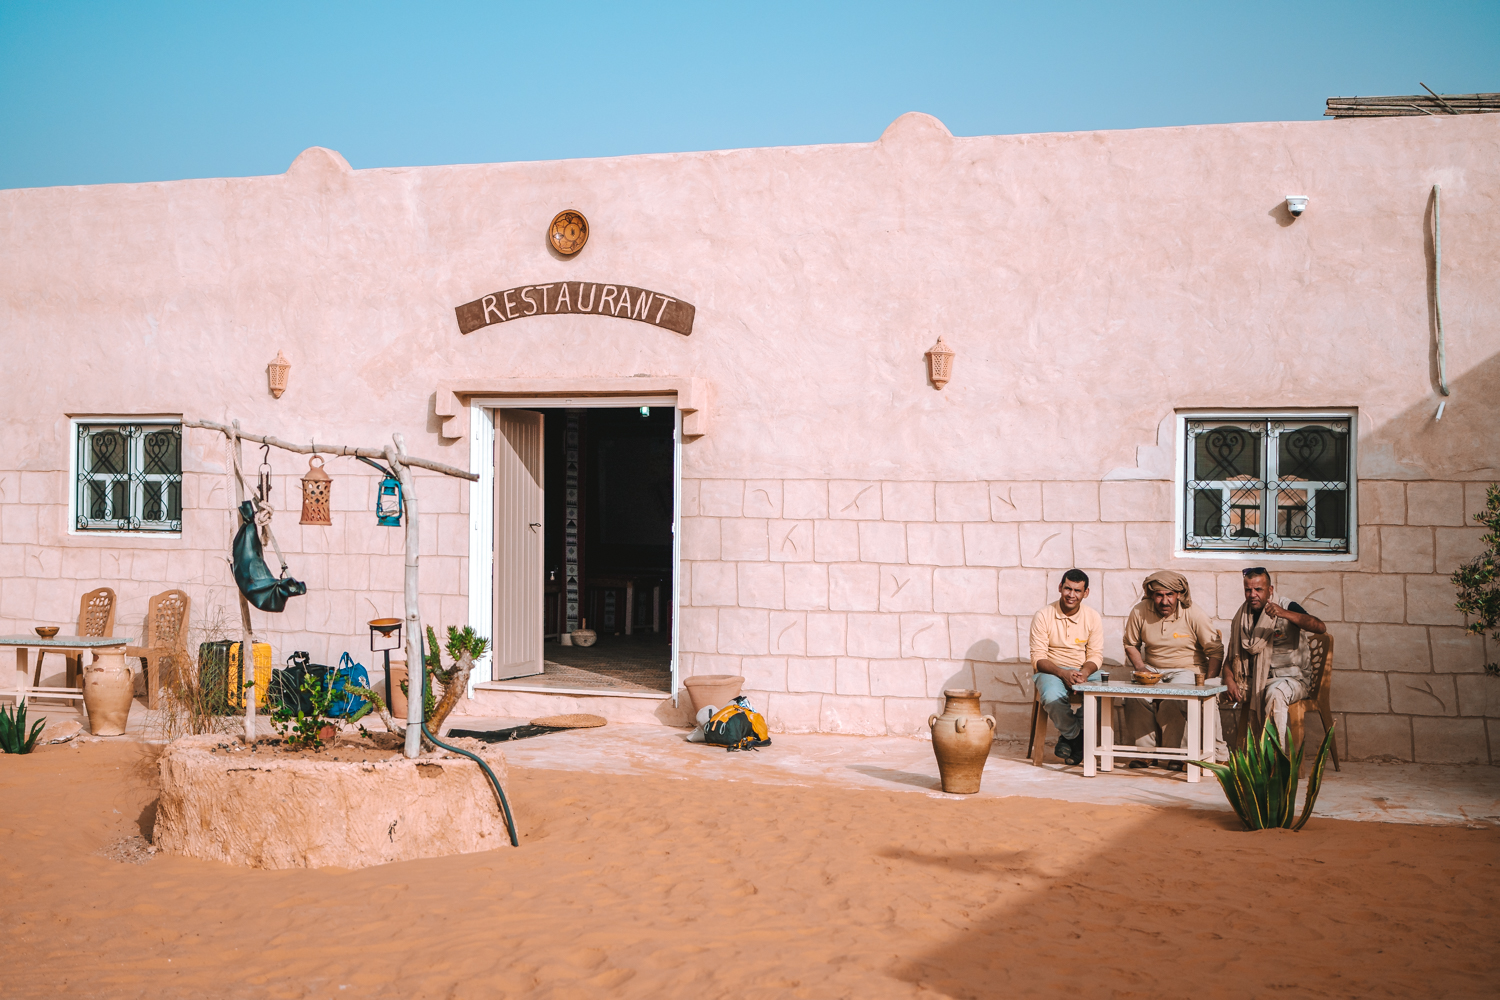 Restaurant in Campement Zmela, where to stay in Tunisia